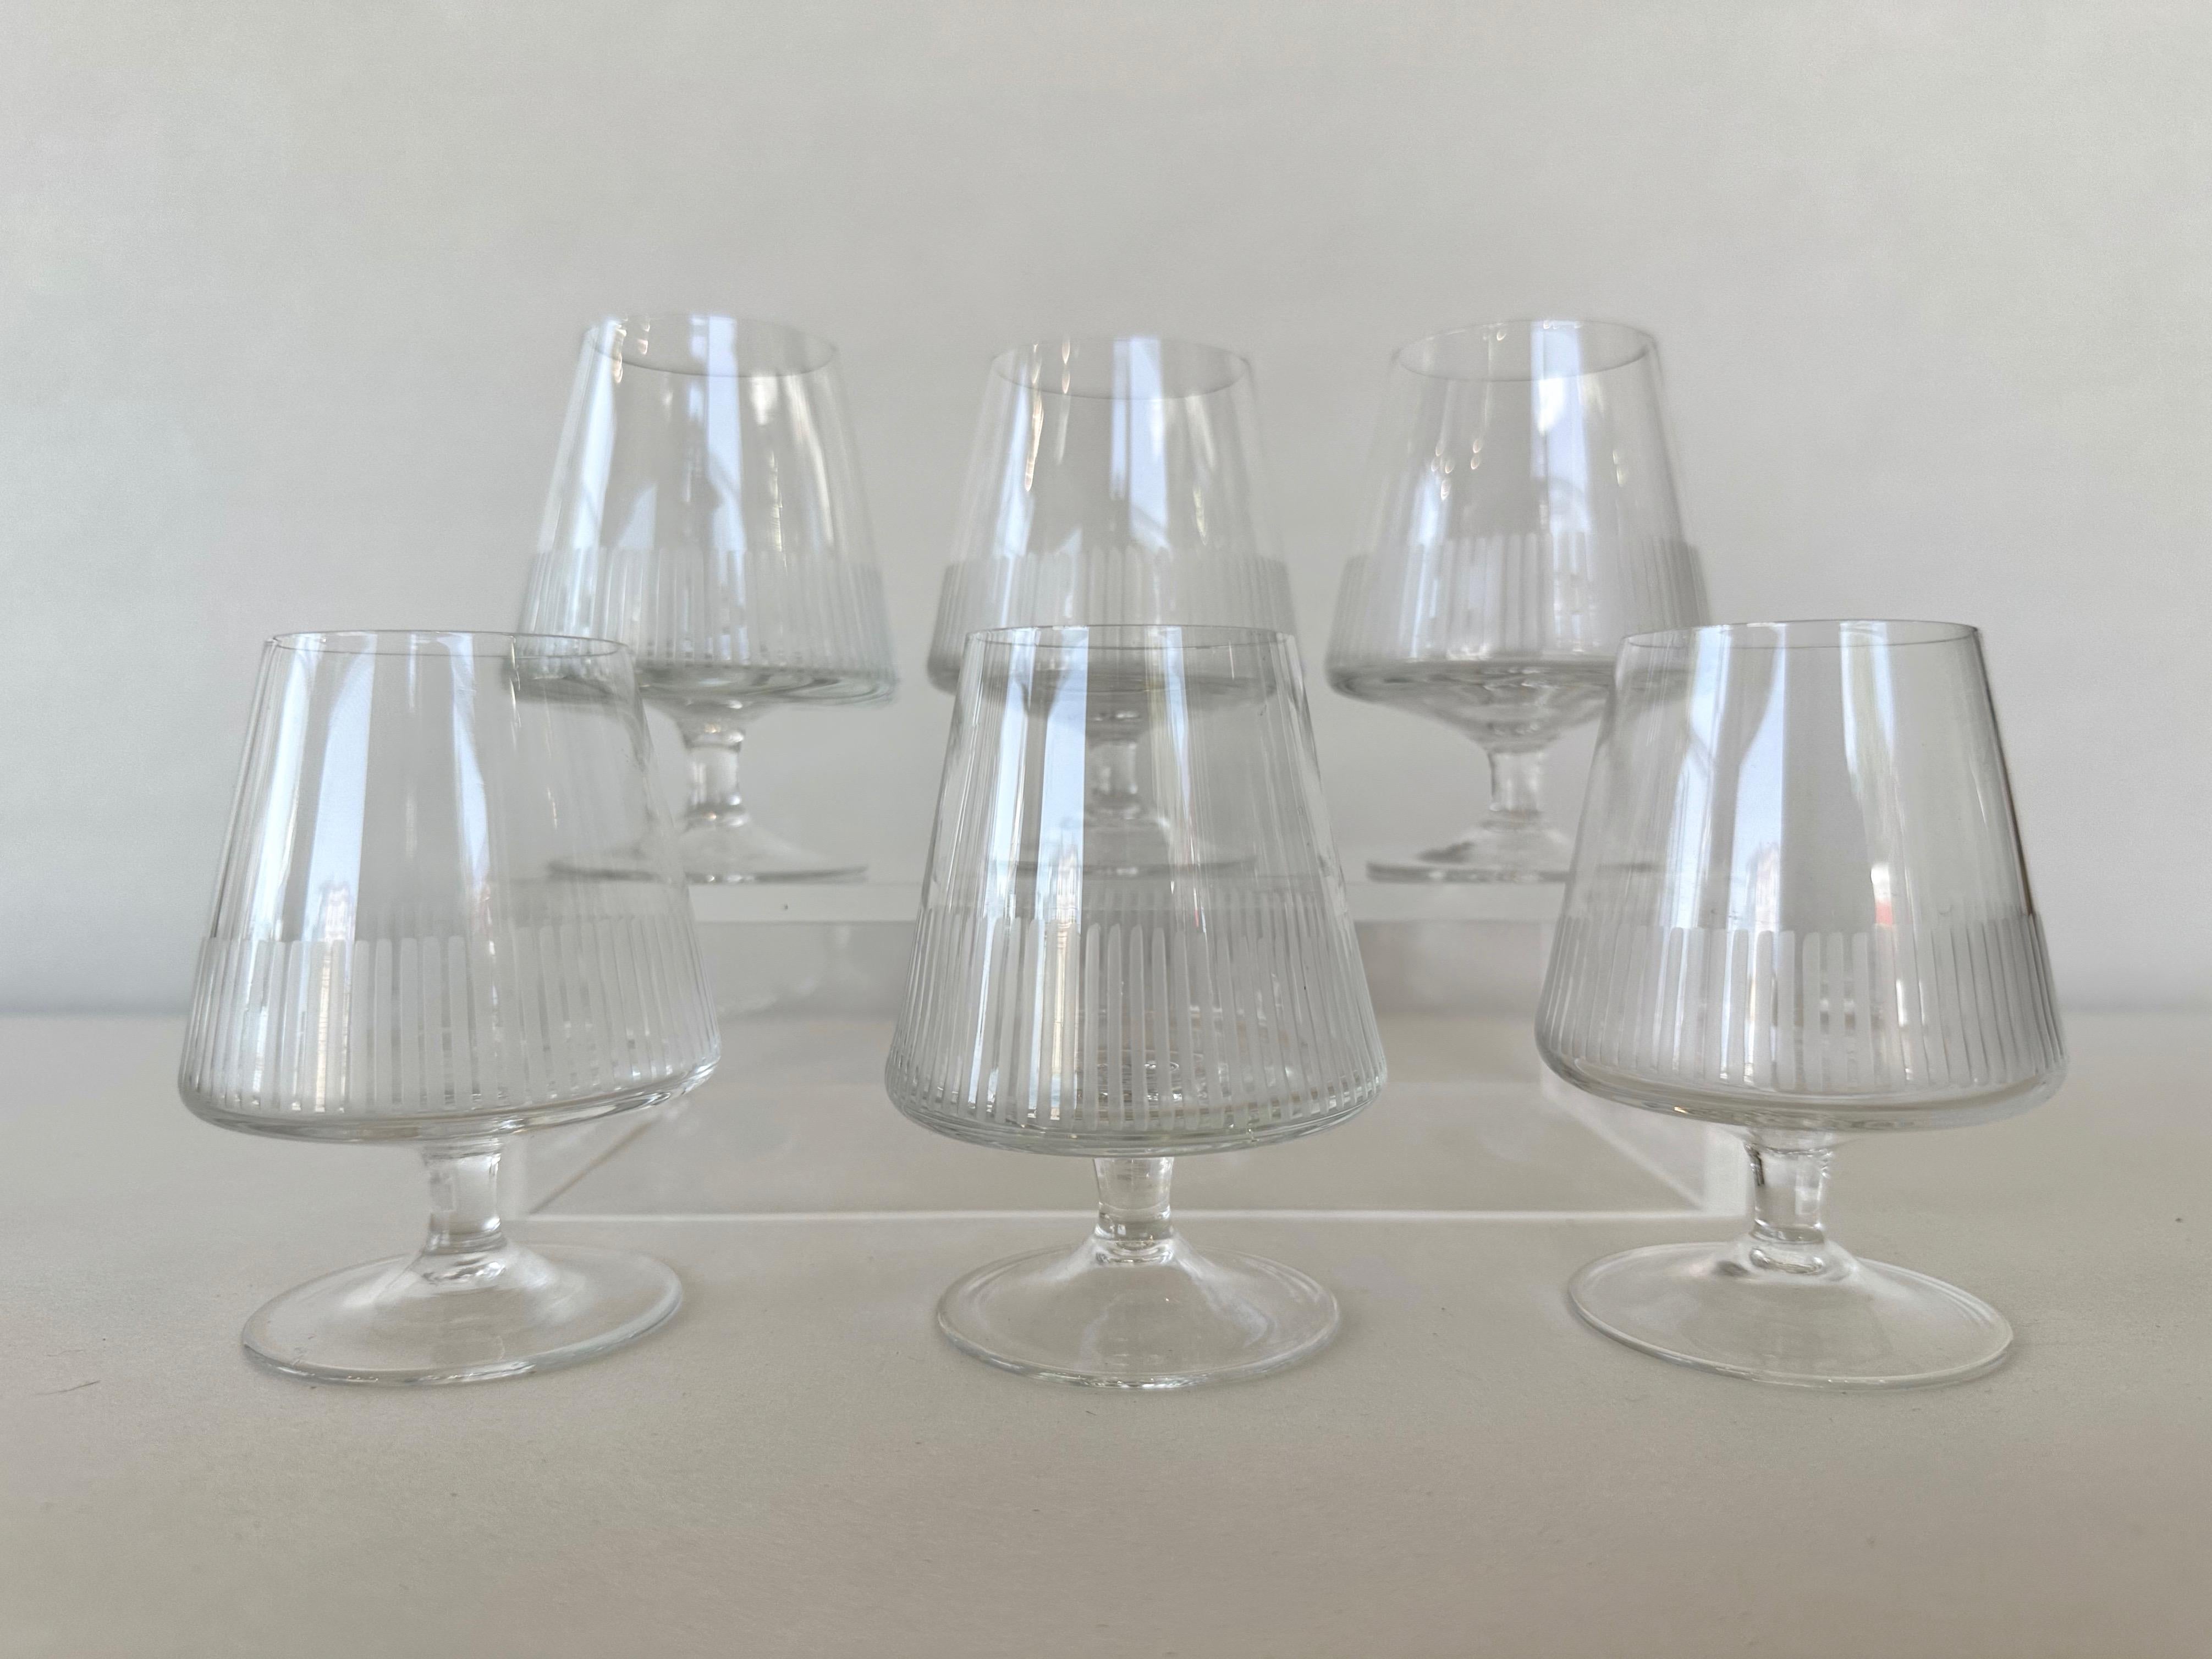 A 1950s six-piece set of etched crystal balloon glasses by Atlantis.

Perfectly proportioned crystal stemware featuring exactingly hand-etched vertical line detailing around the body. Specifically shaped to enhance the flavor and aroma of cognacs,